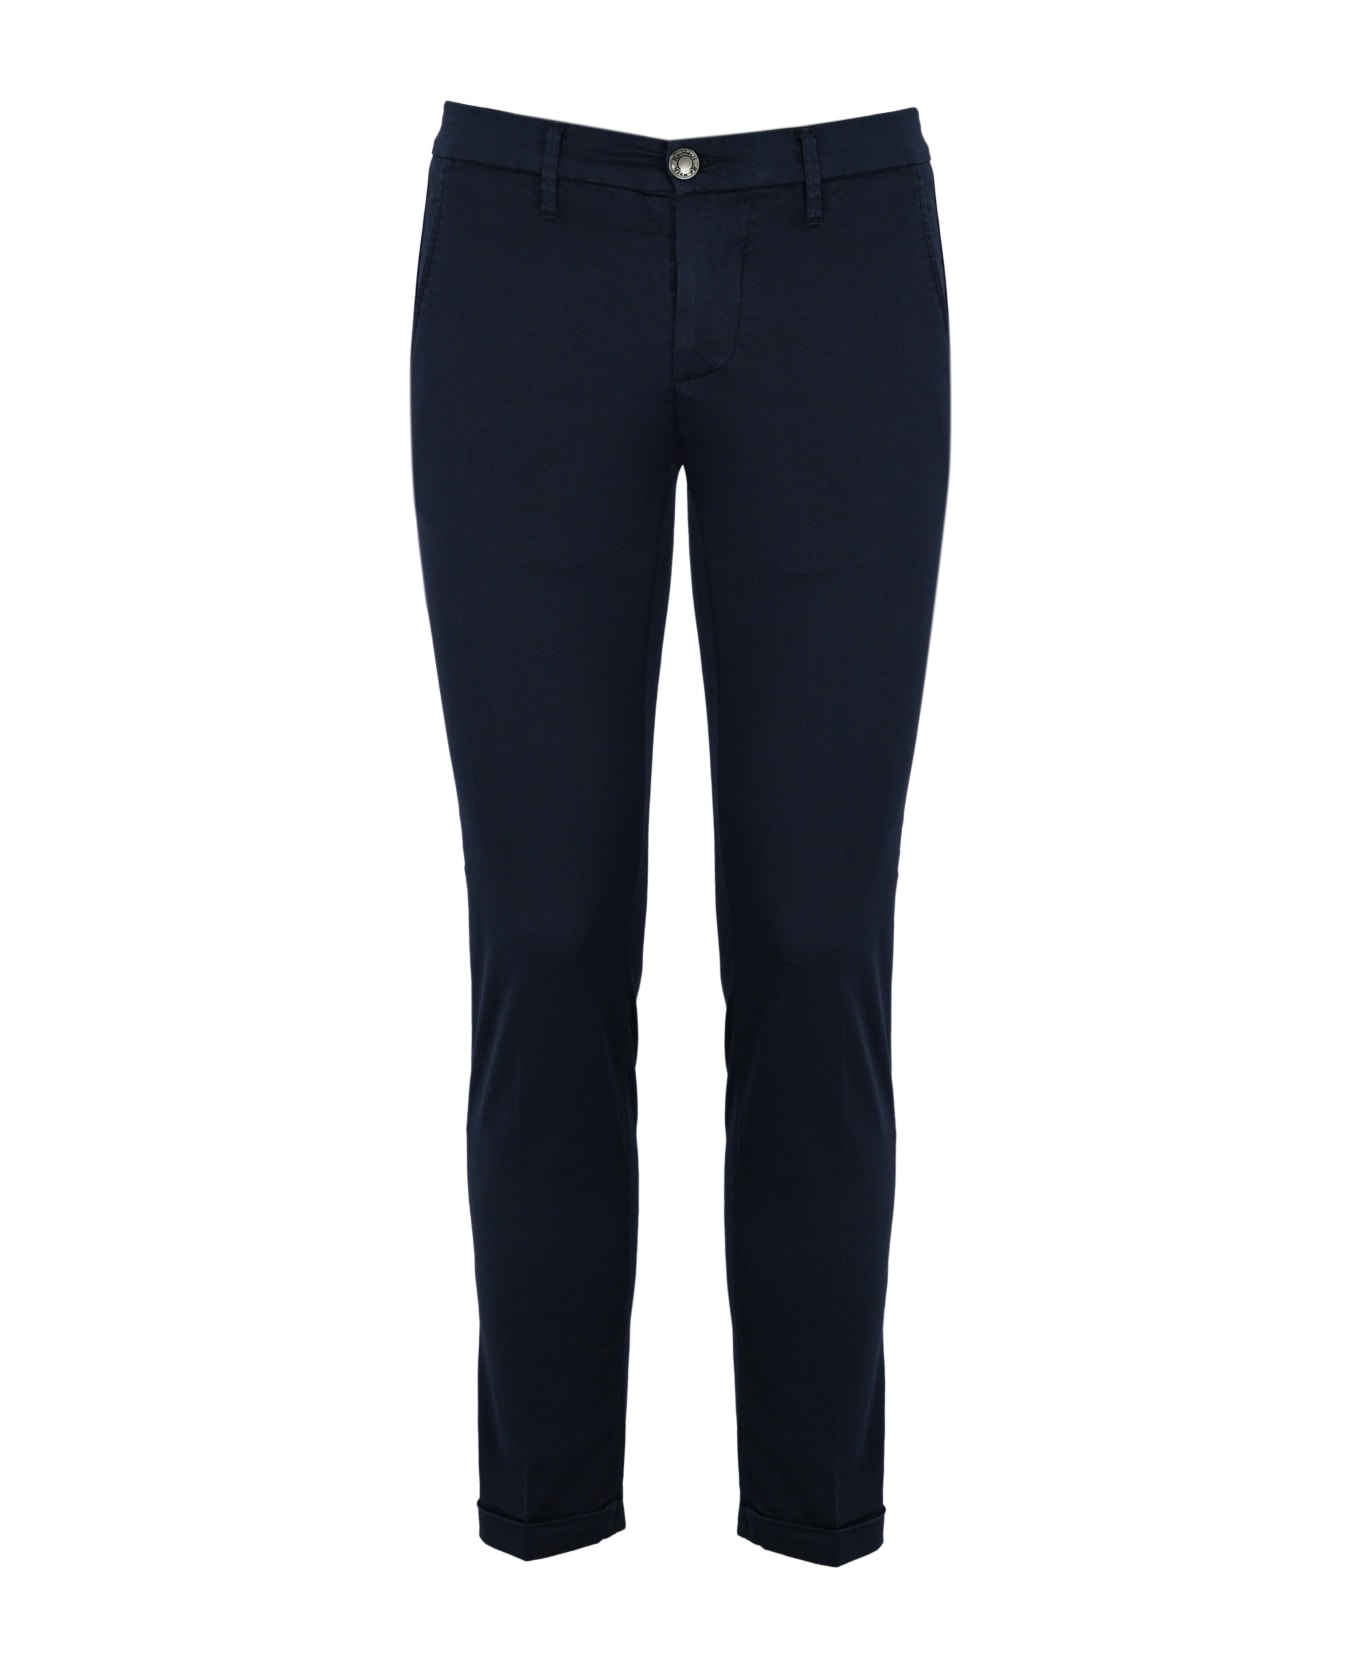 Re-HasH Chino Trousers - Blue